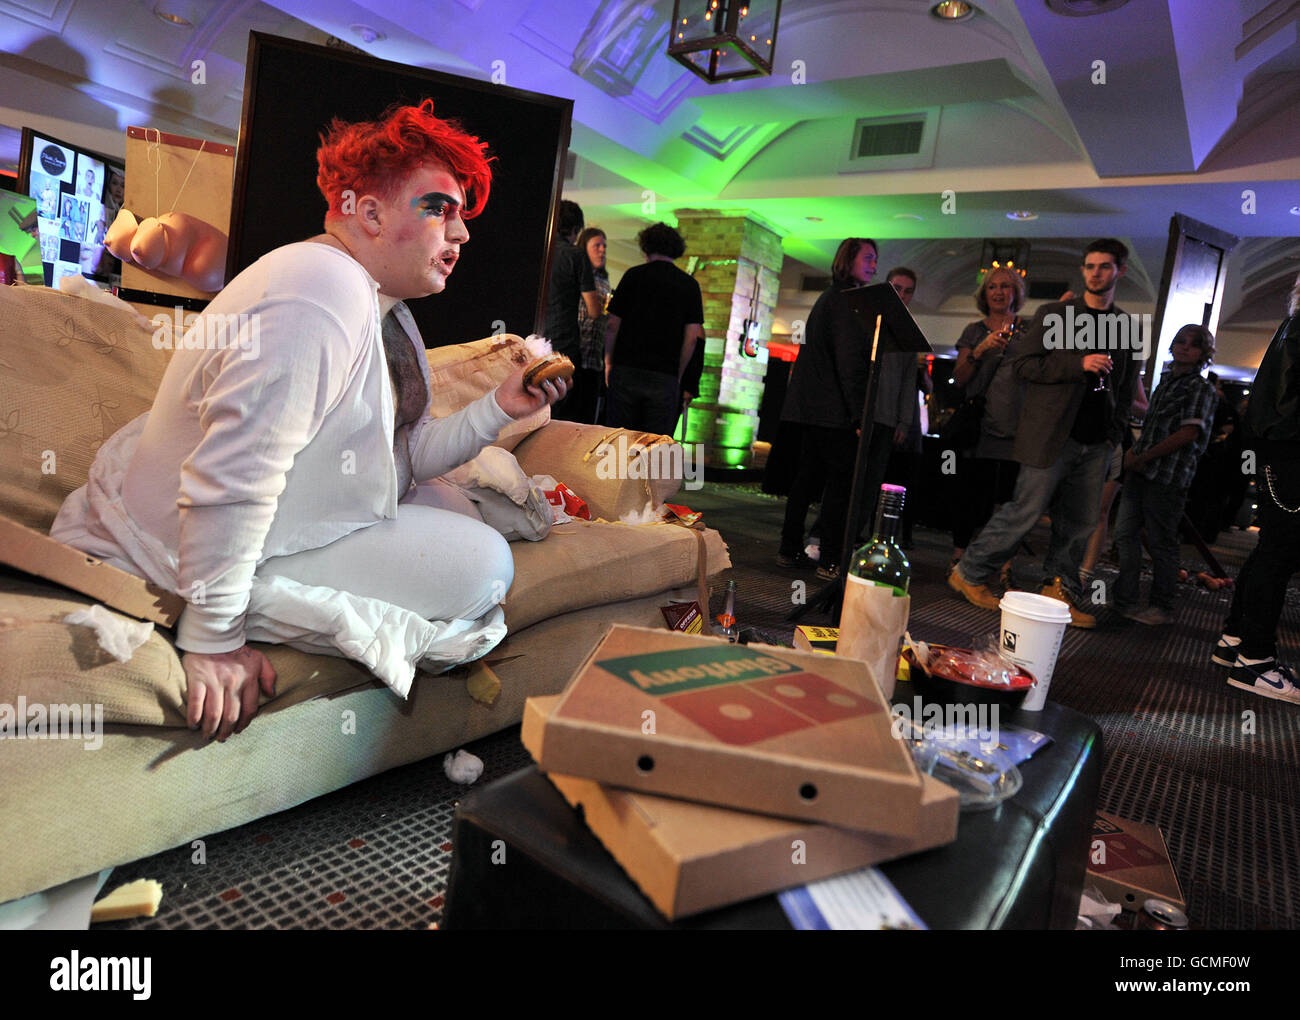 An actor representing Greed pictured during a seven deadly sins themed party at The Relentless Energy Drink Kerrang! Awards drinks reception at The Brewery, London. Stock Photo